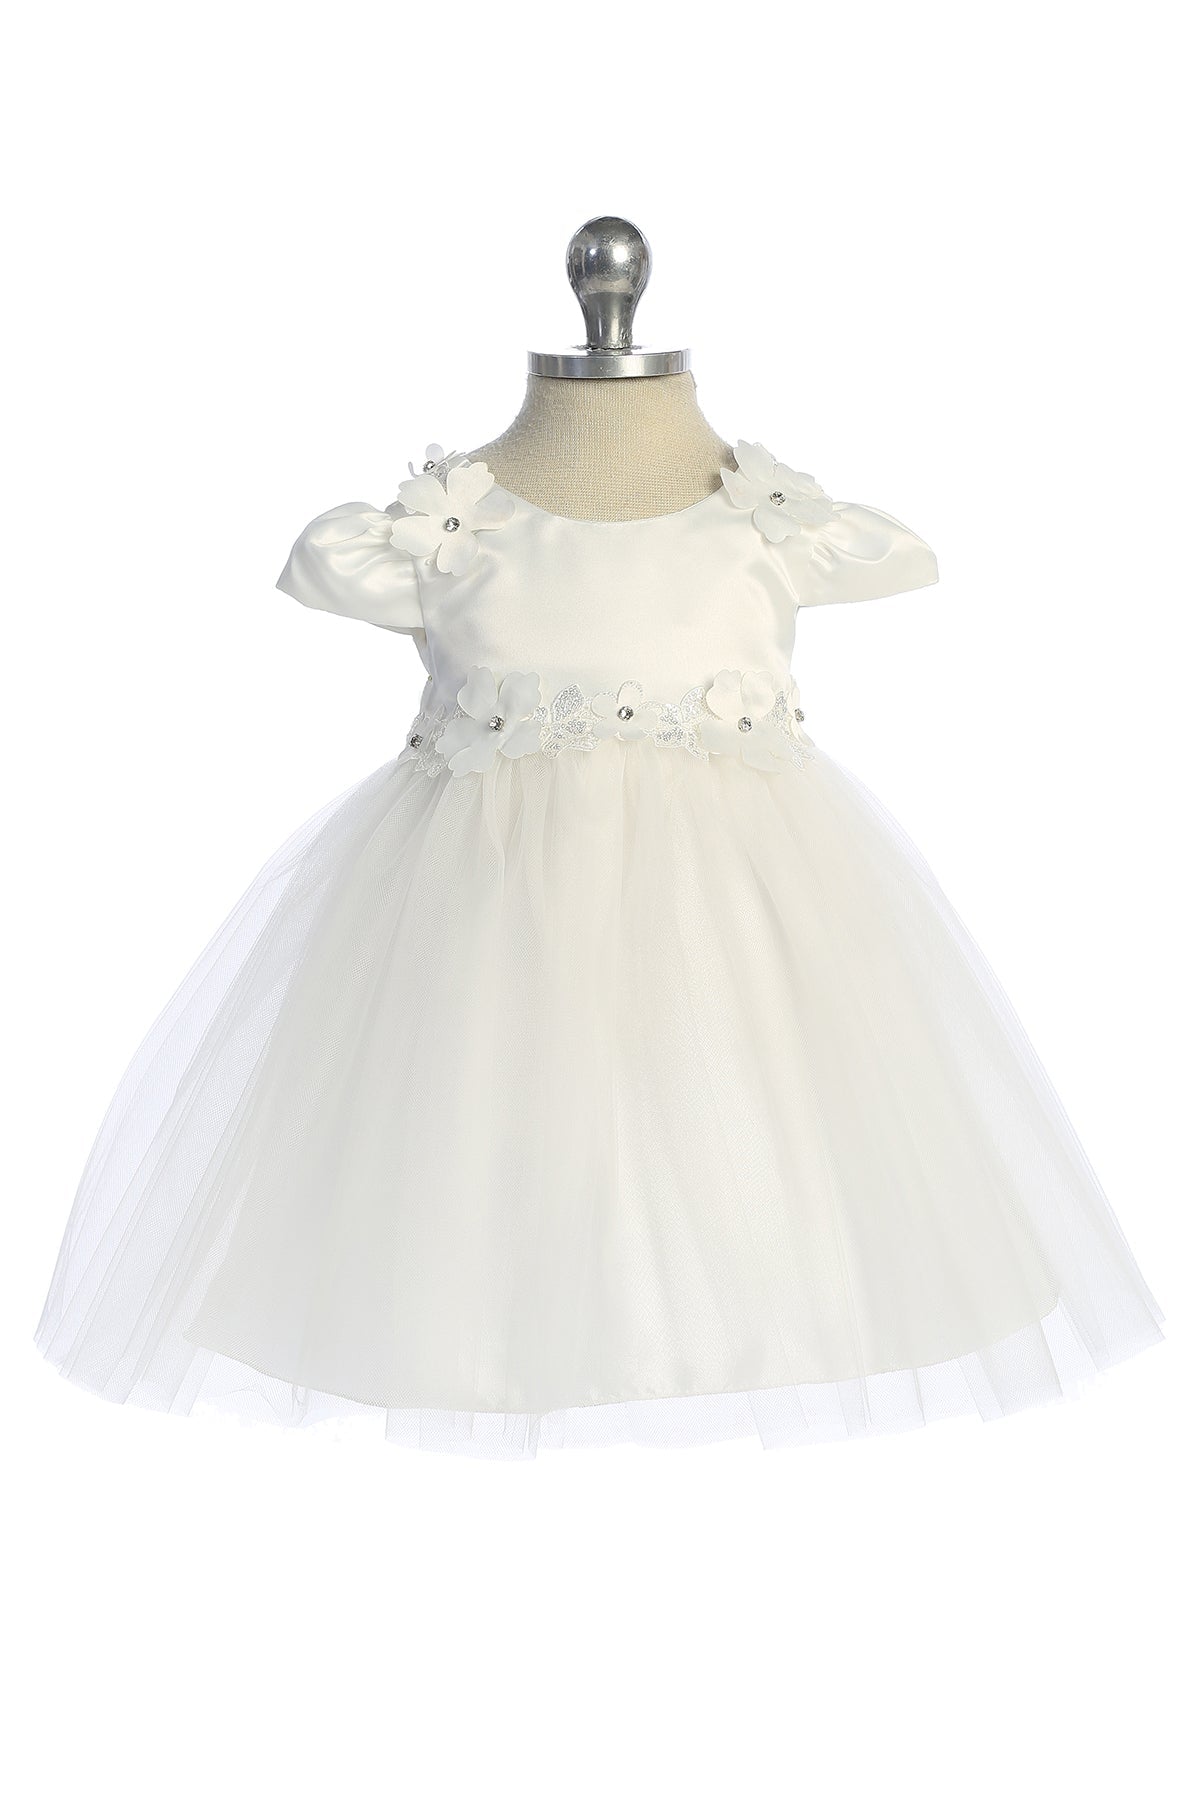 Dress - Capped Sleeve Satin & Tulle Baby Dress With Floral Trim